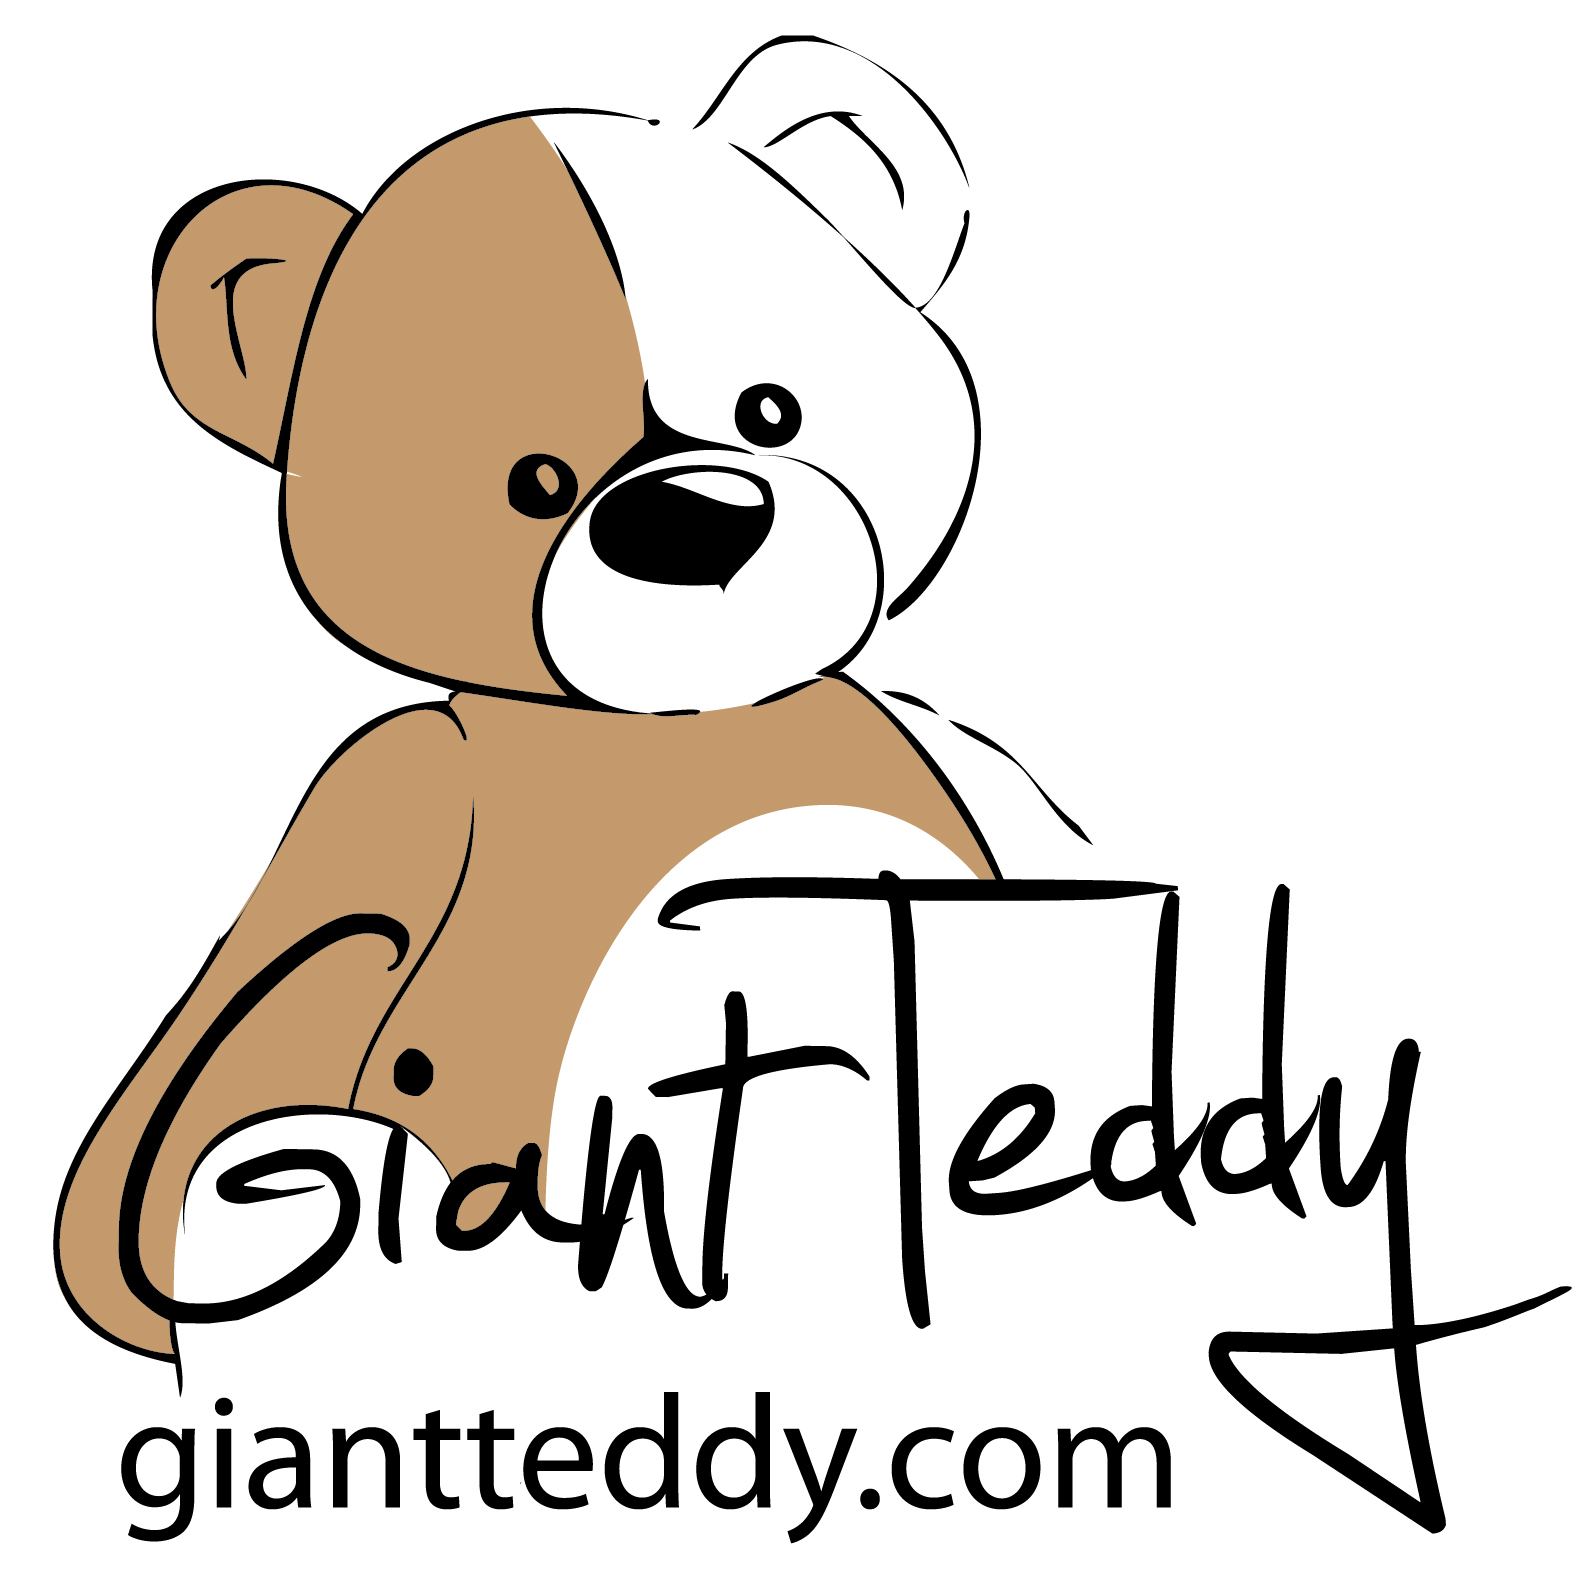 Giant Teddy makes unique bears 18in to 6ft tall